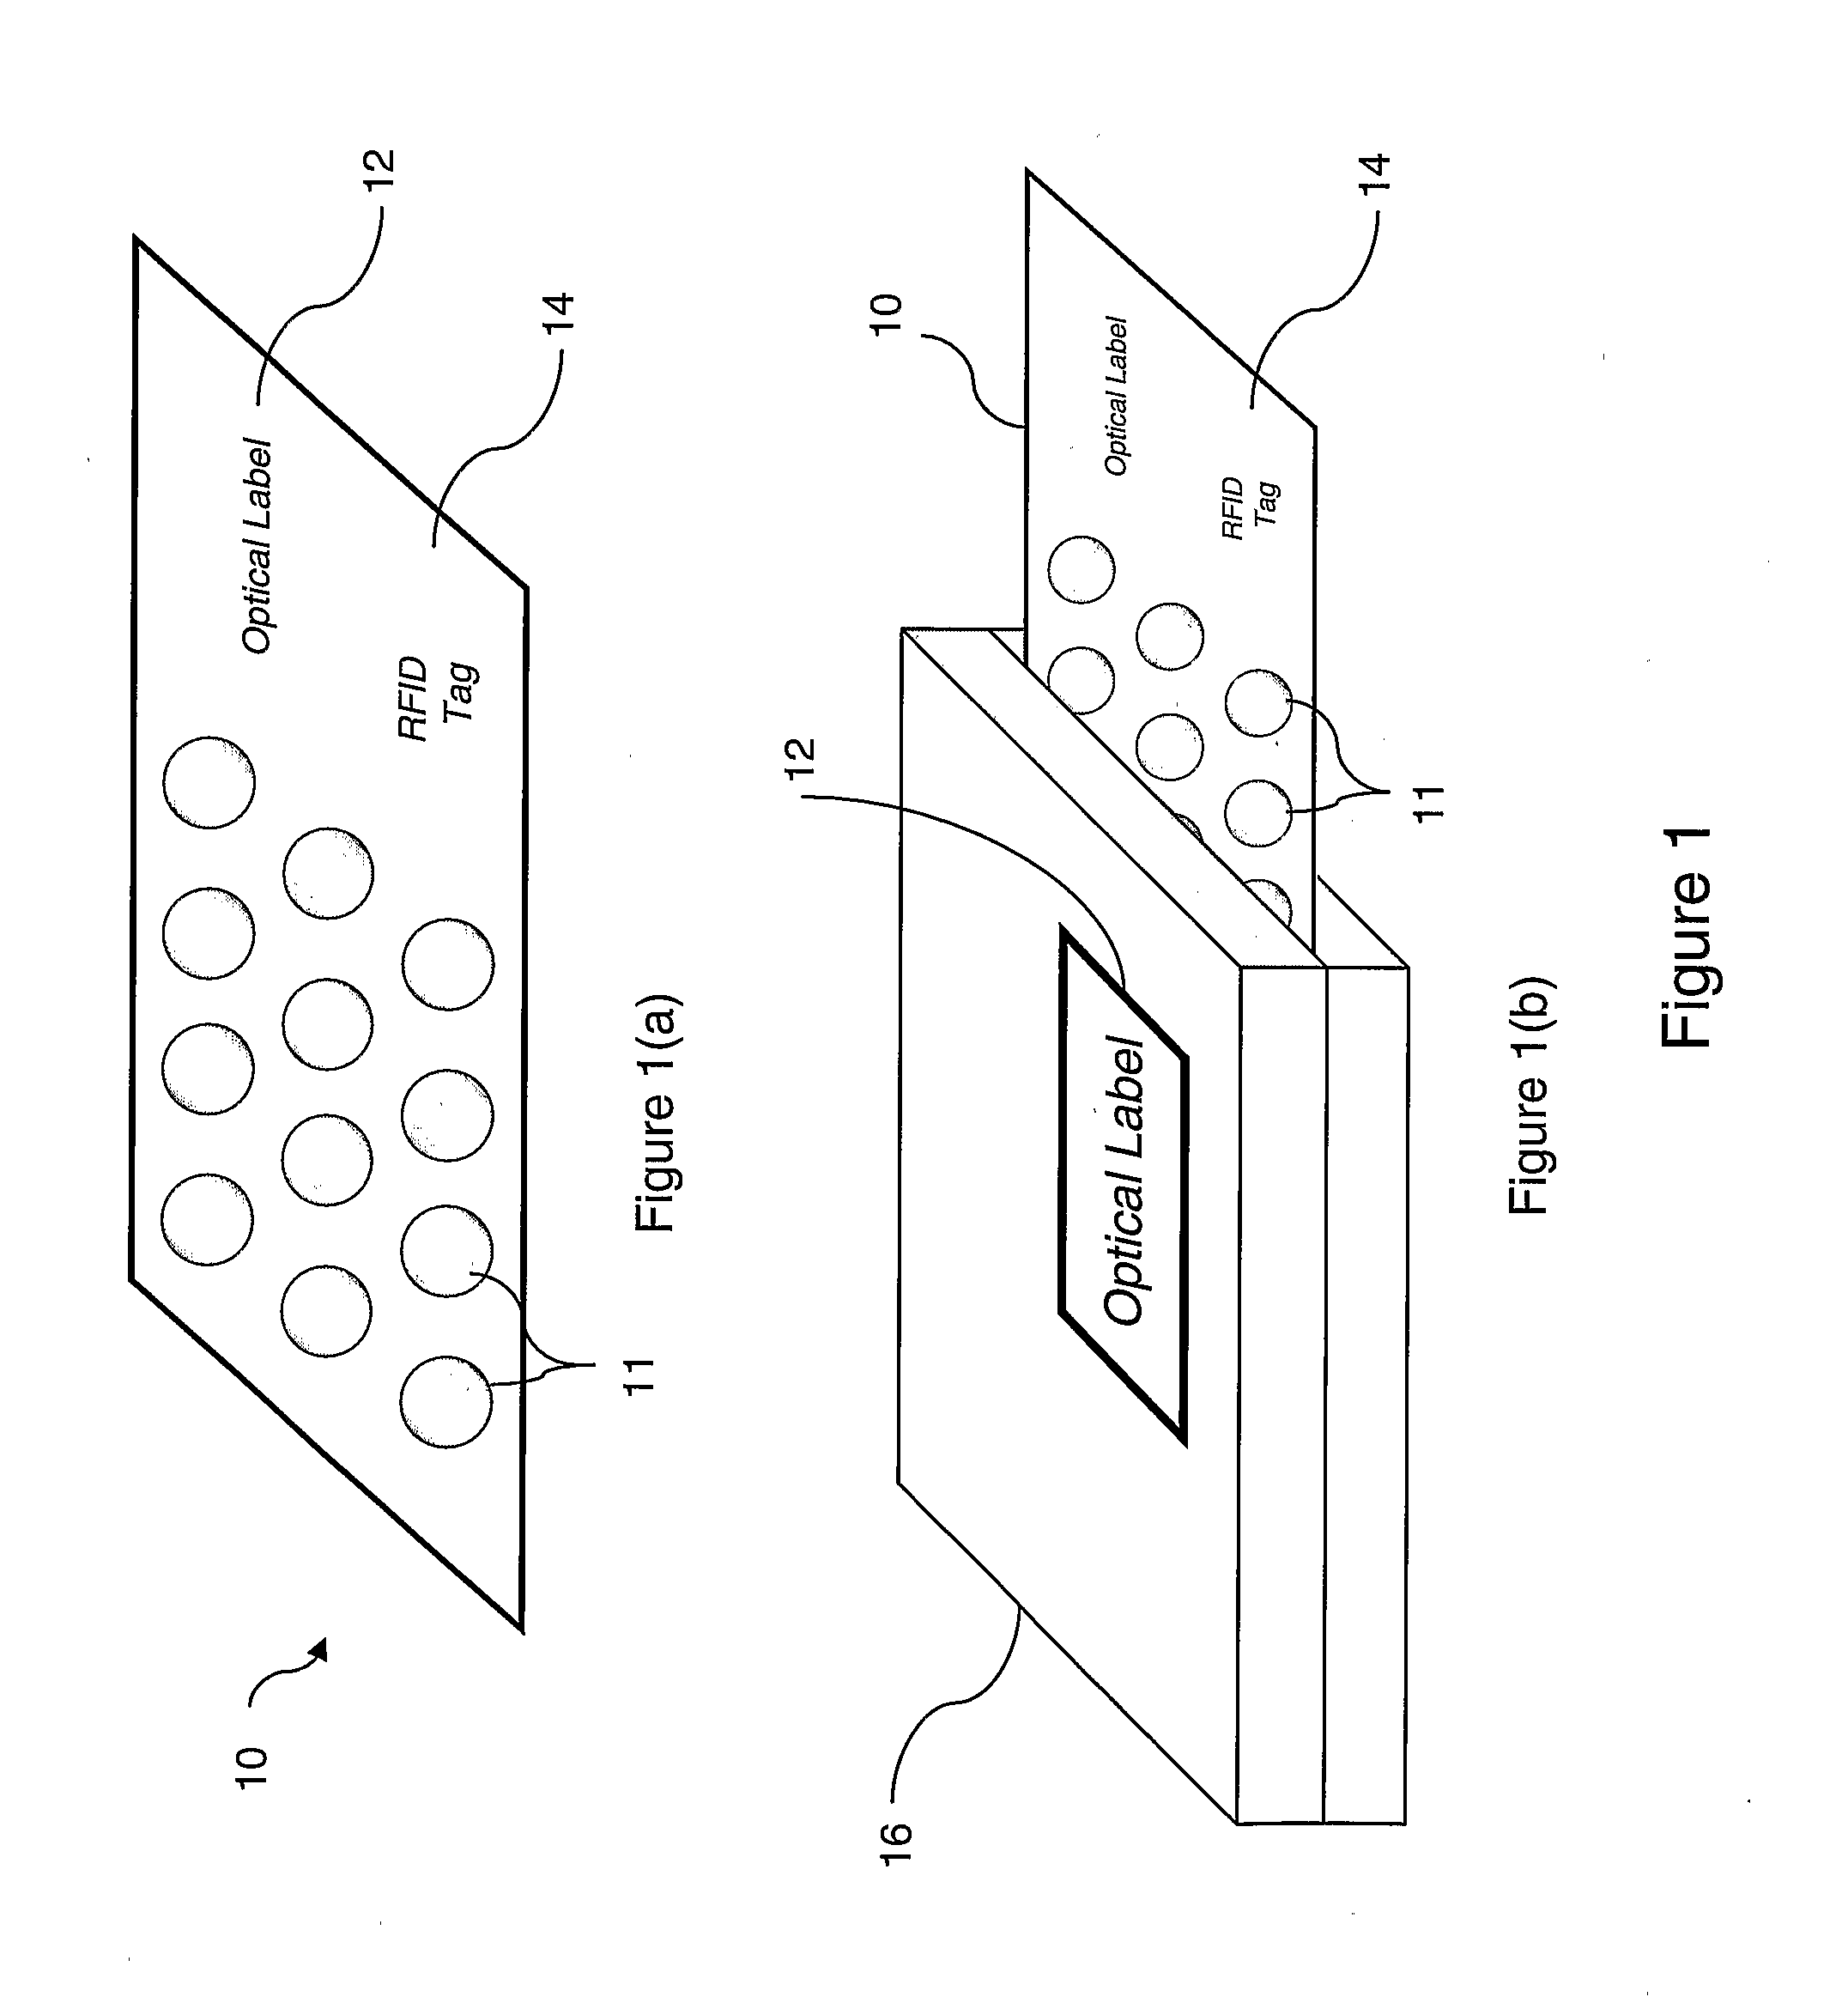 Method and device for obtaining item information using RFID tags